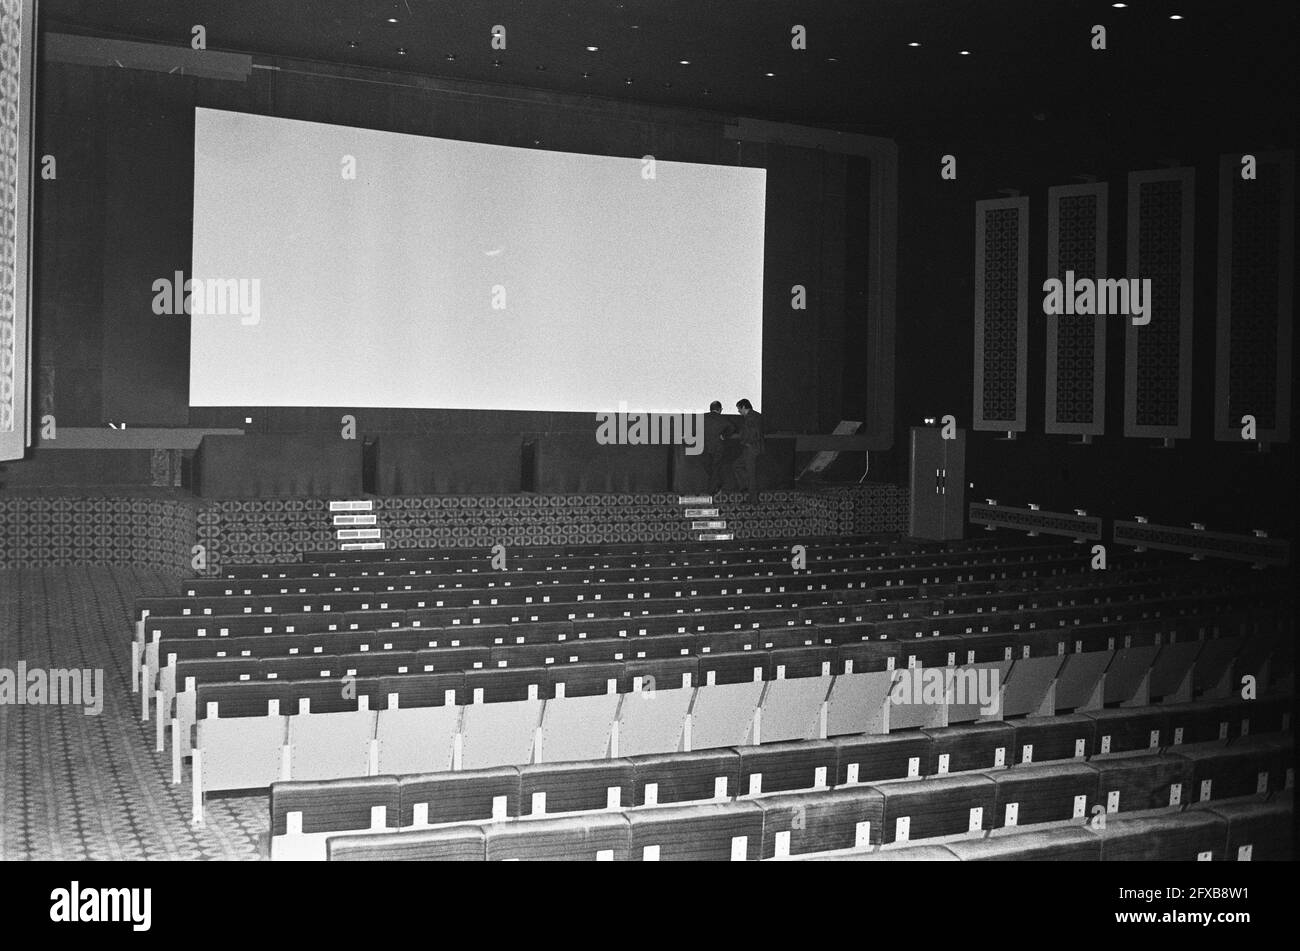 https://c8.alamy.com/comp/2FXB8W1/interior-of-new-cinema-cinema-international-in-amsterdam-14-march-1975-cinemas-interiors-the-netherlands-20th-century-press-agency-photo-news-to-remember-documentary-historic-photography-1945-1990-visual-stories-human-history-of-the-twentieth-century-capturing-moments-in-time-2FXB8W1.jpg